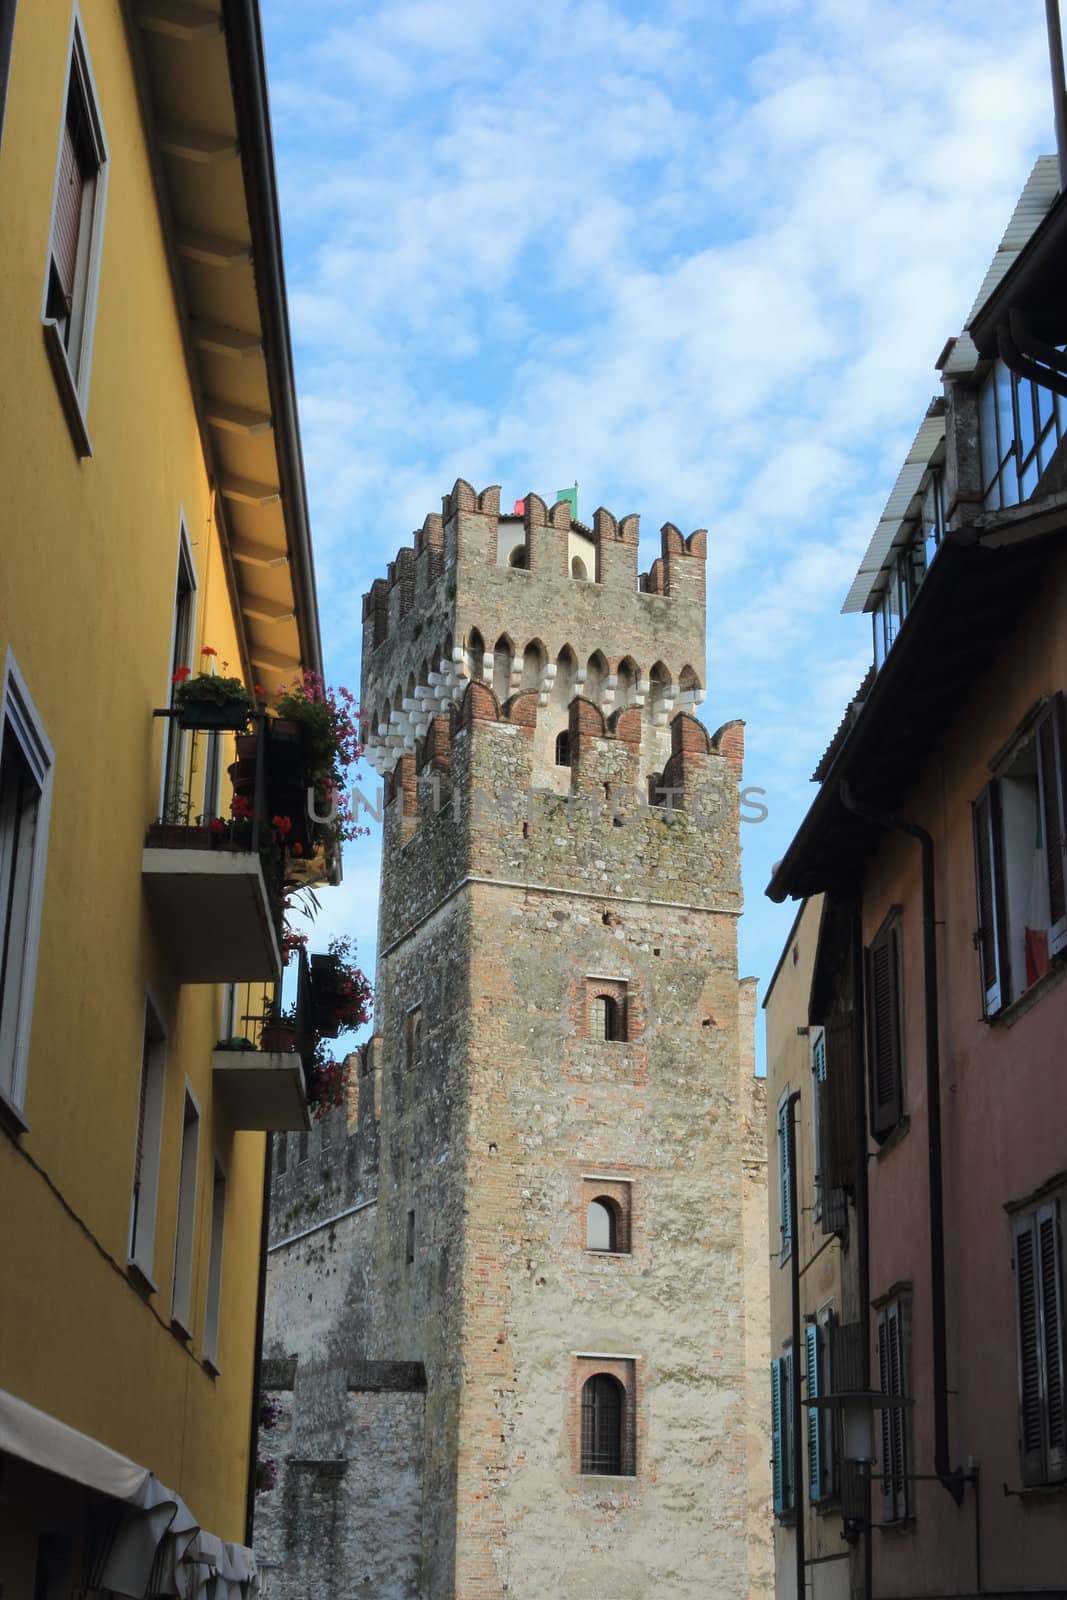 The Italian city Sirmione located on coast of the largest lake Garda. A kind on castle Sirmione